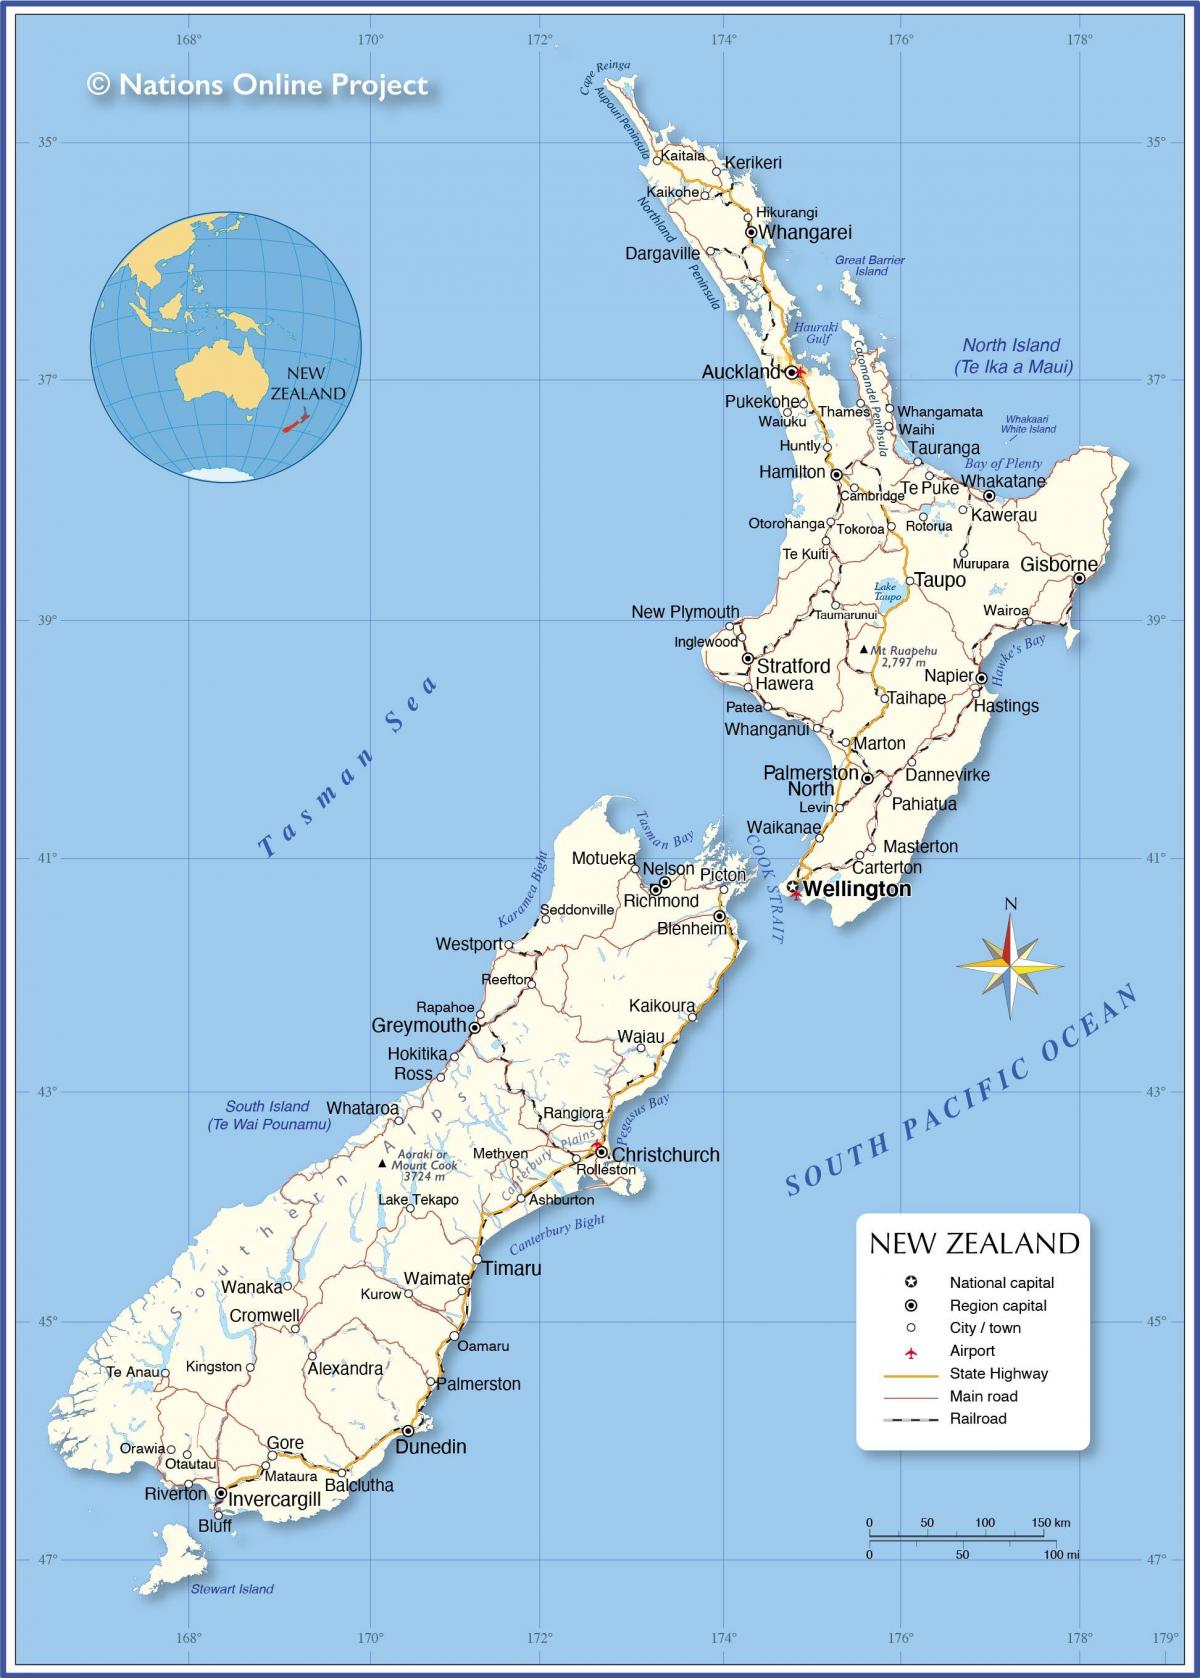 New Zealand on a map